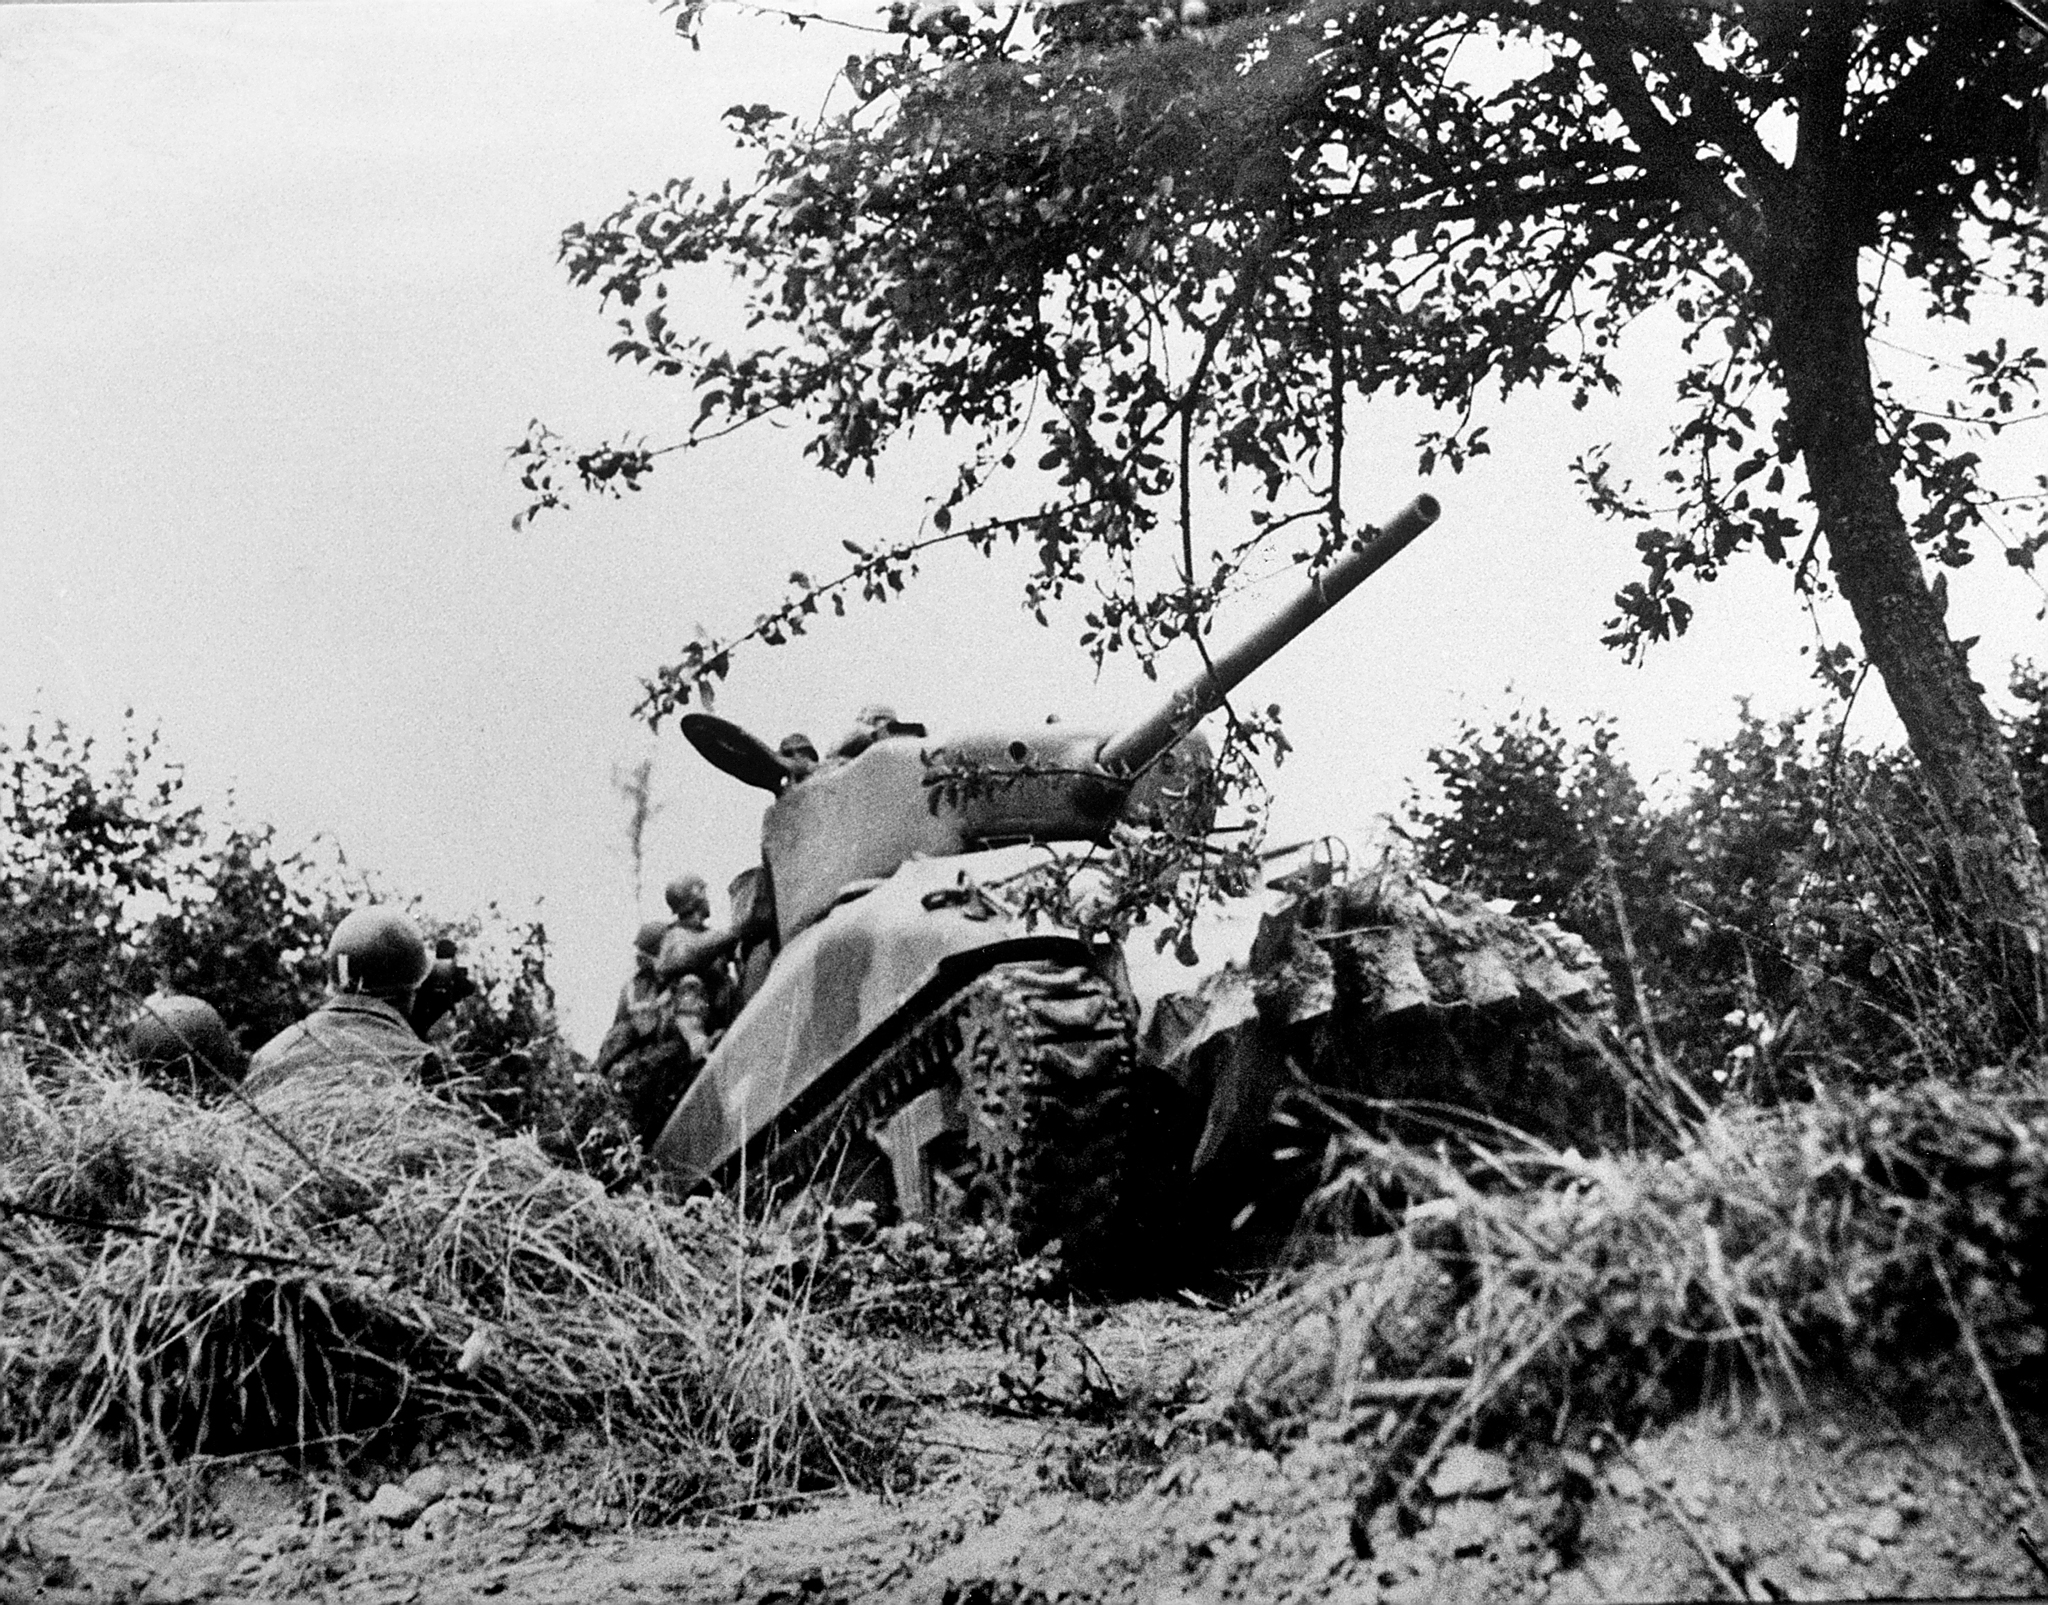 American soldiers and a Sherman tank equipped with a hedgerow-busting plow move forward near the town of Saint-Sauveur-le-Vicomte, 1944.